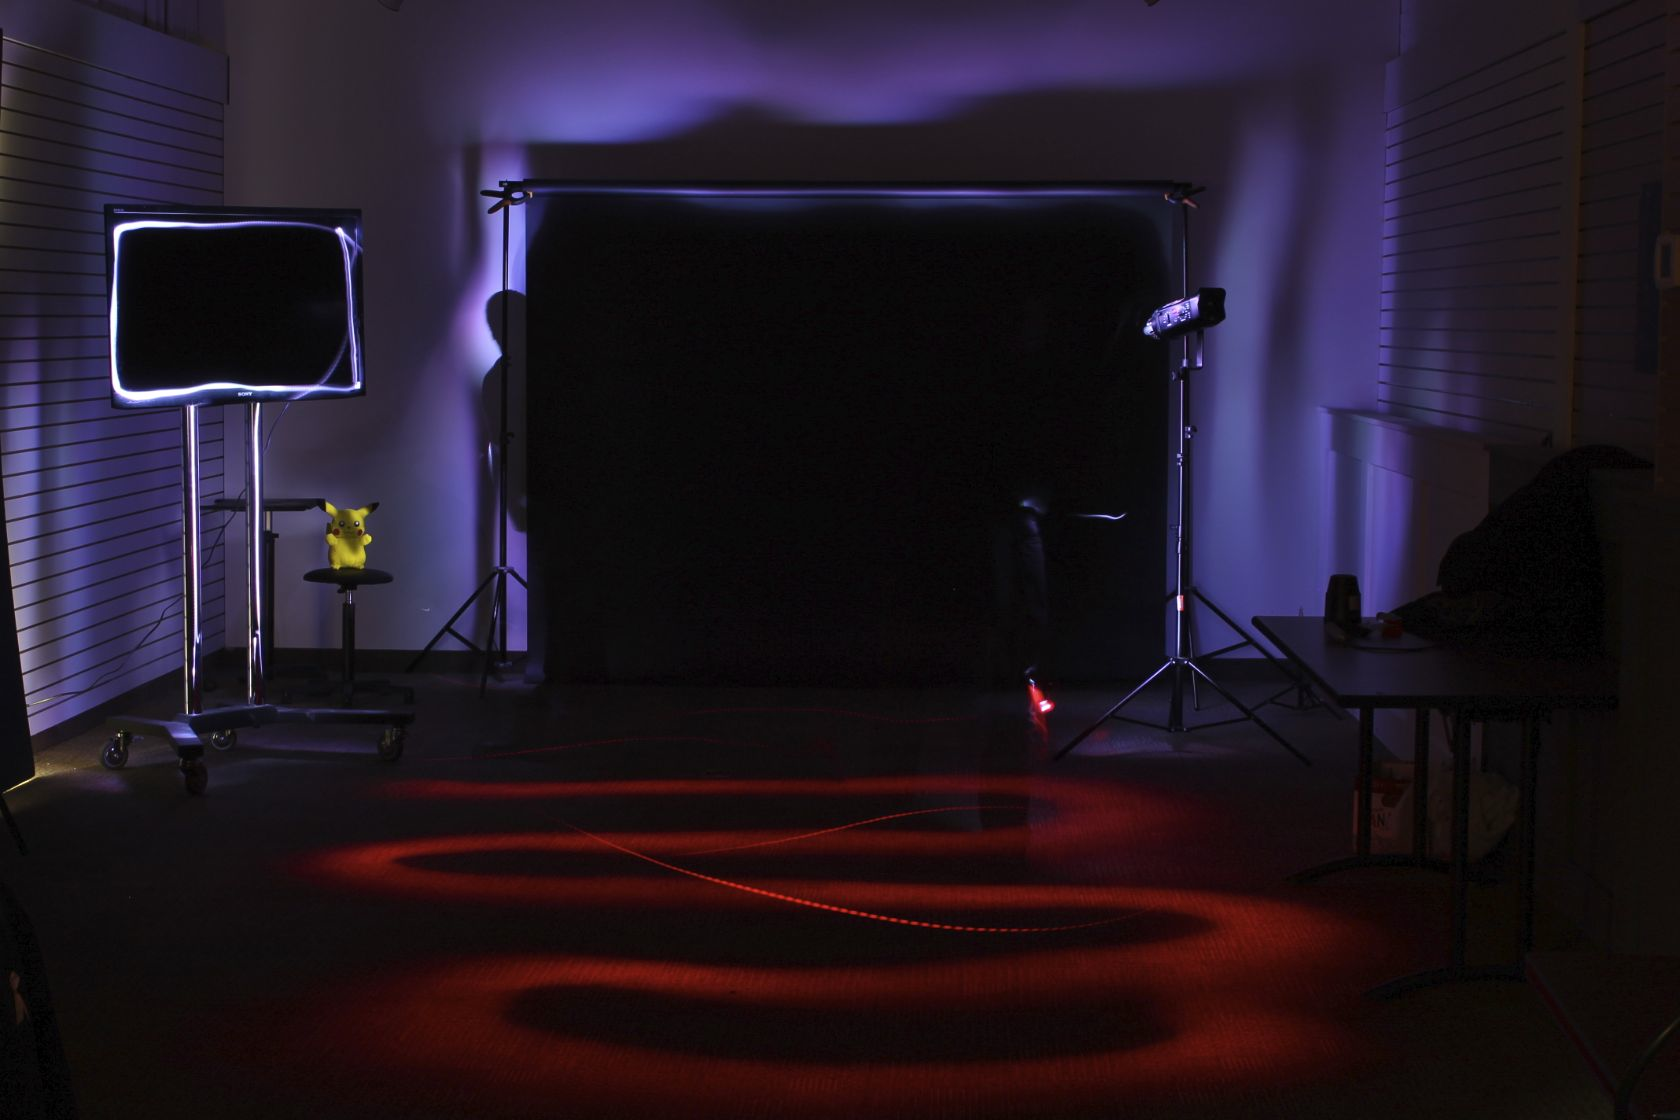 Light painting a room with multiple coloured lights - and the invisible people doing the painting